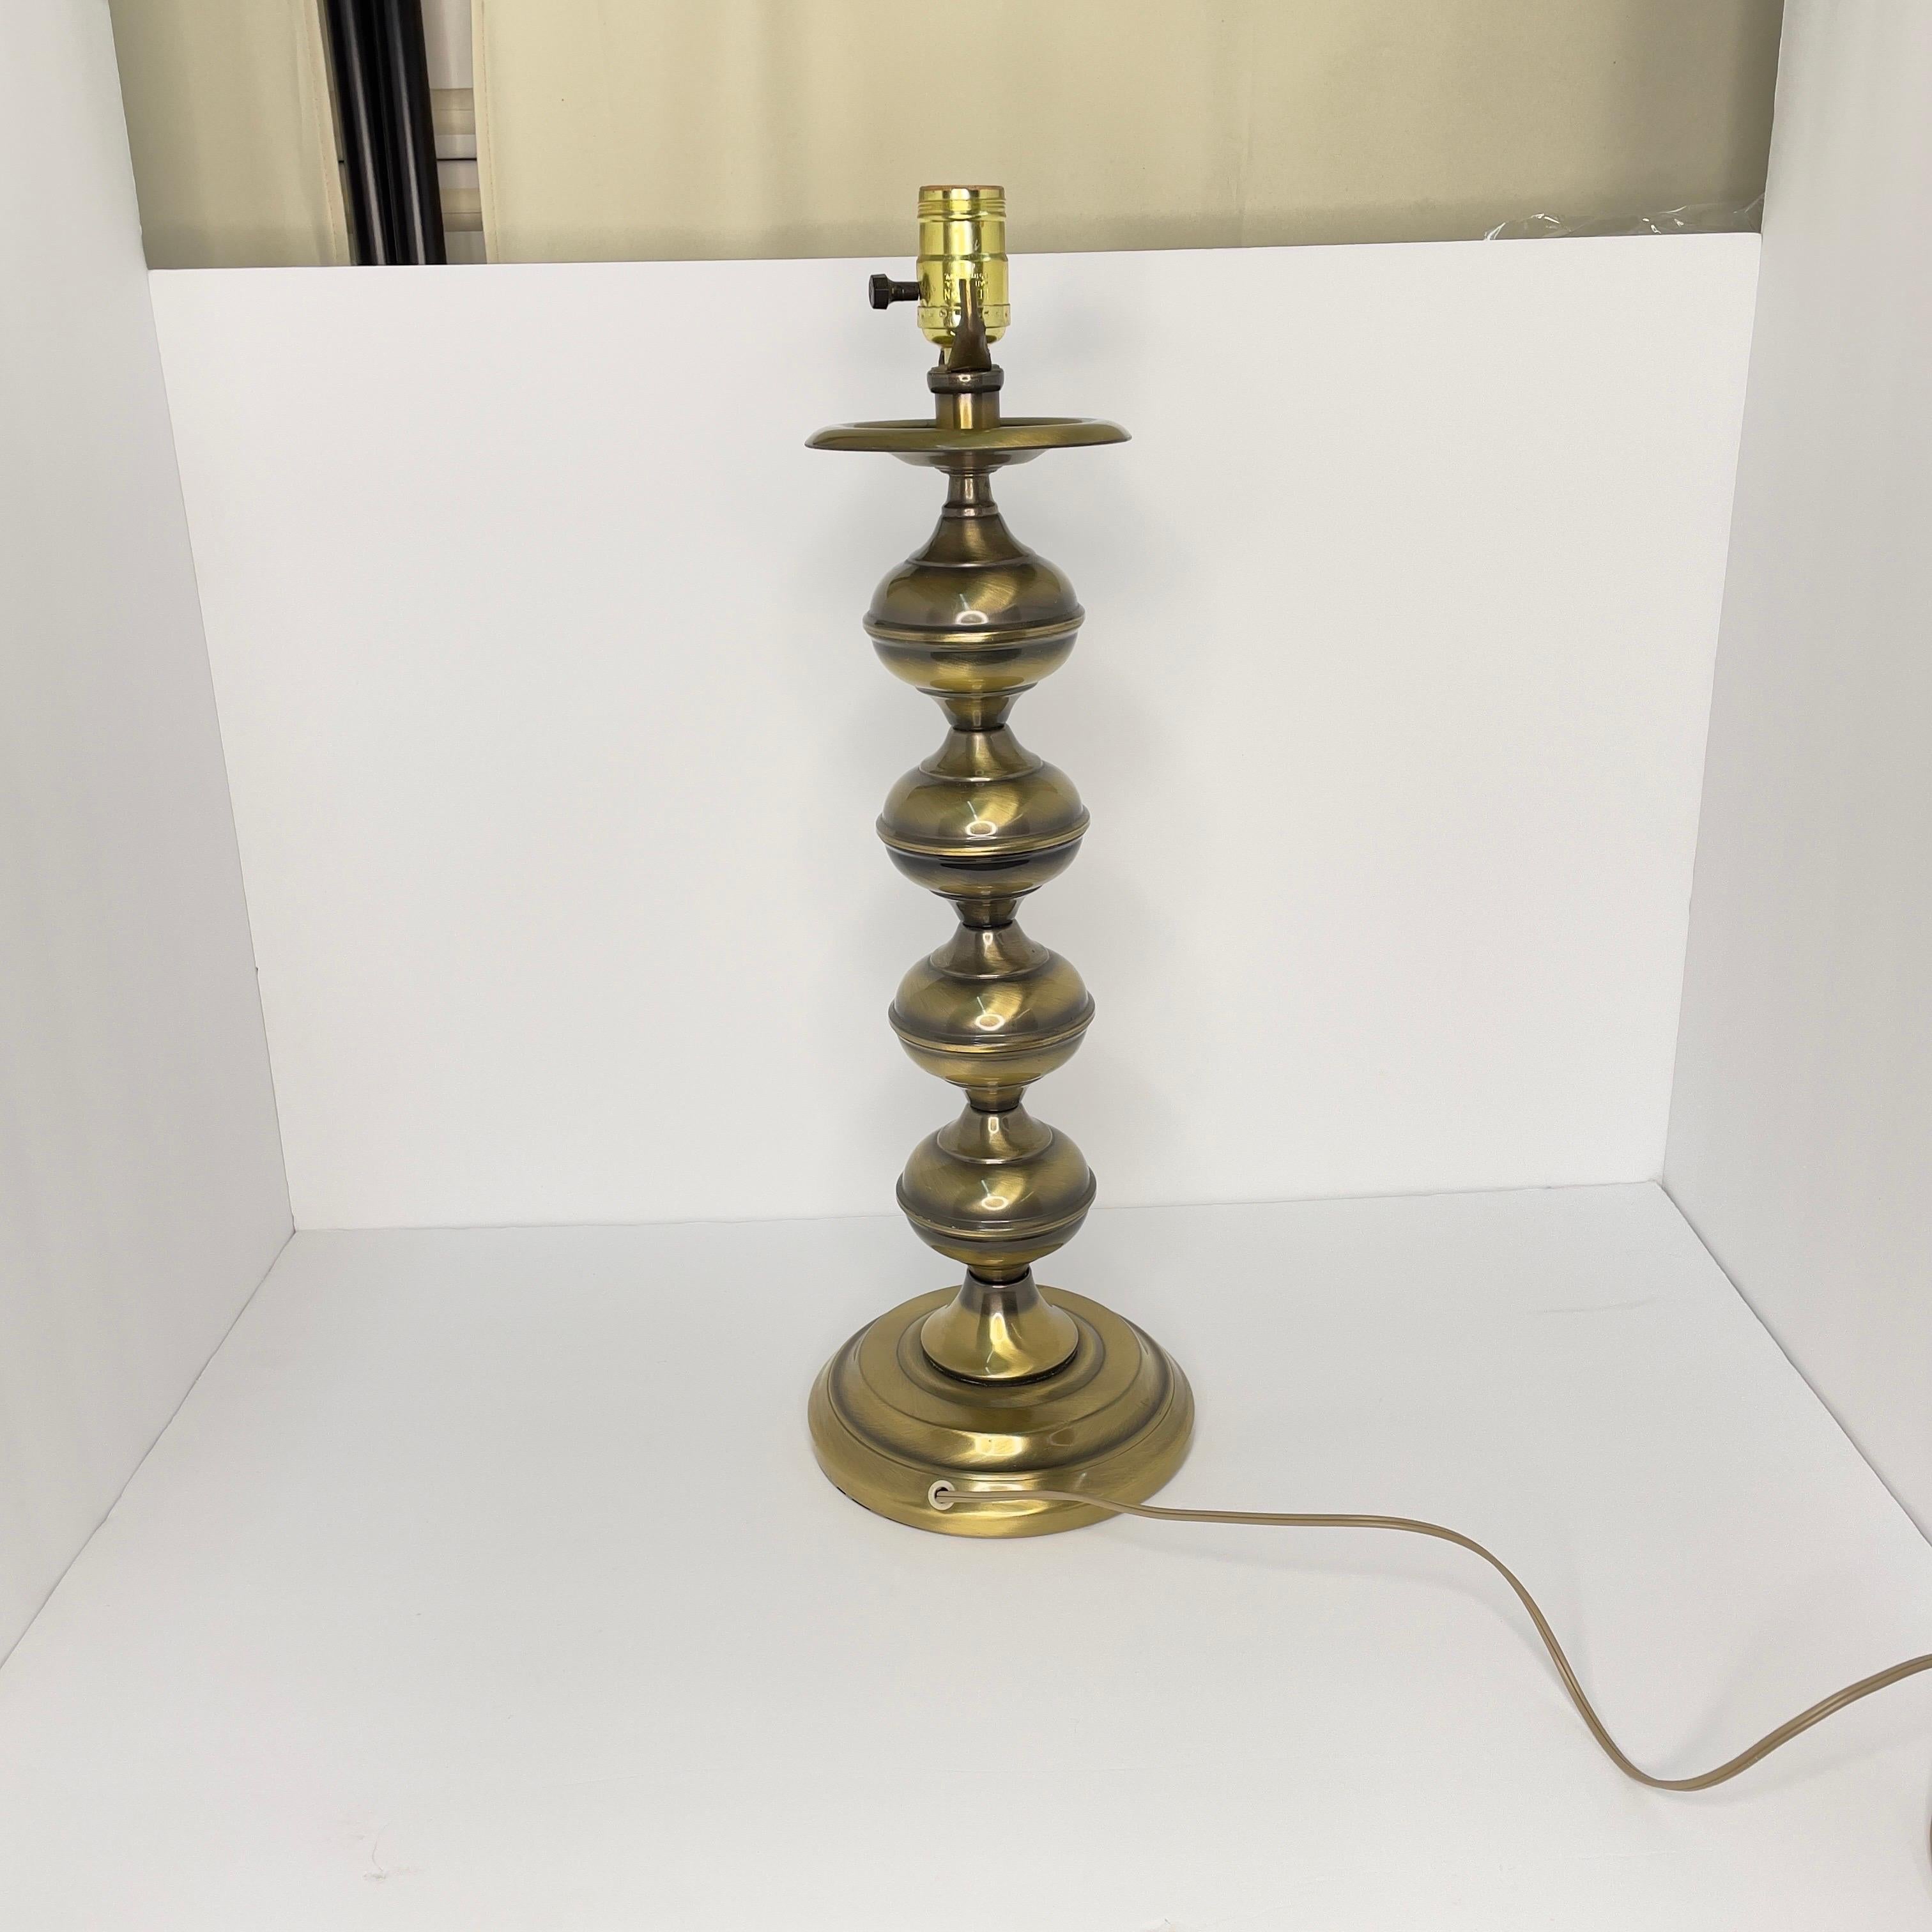 Mid Century Modern Brass Turned Table Lamp With Shade- 2 Pieces In Good Condition For Sale In Cordova, SC